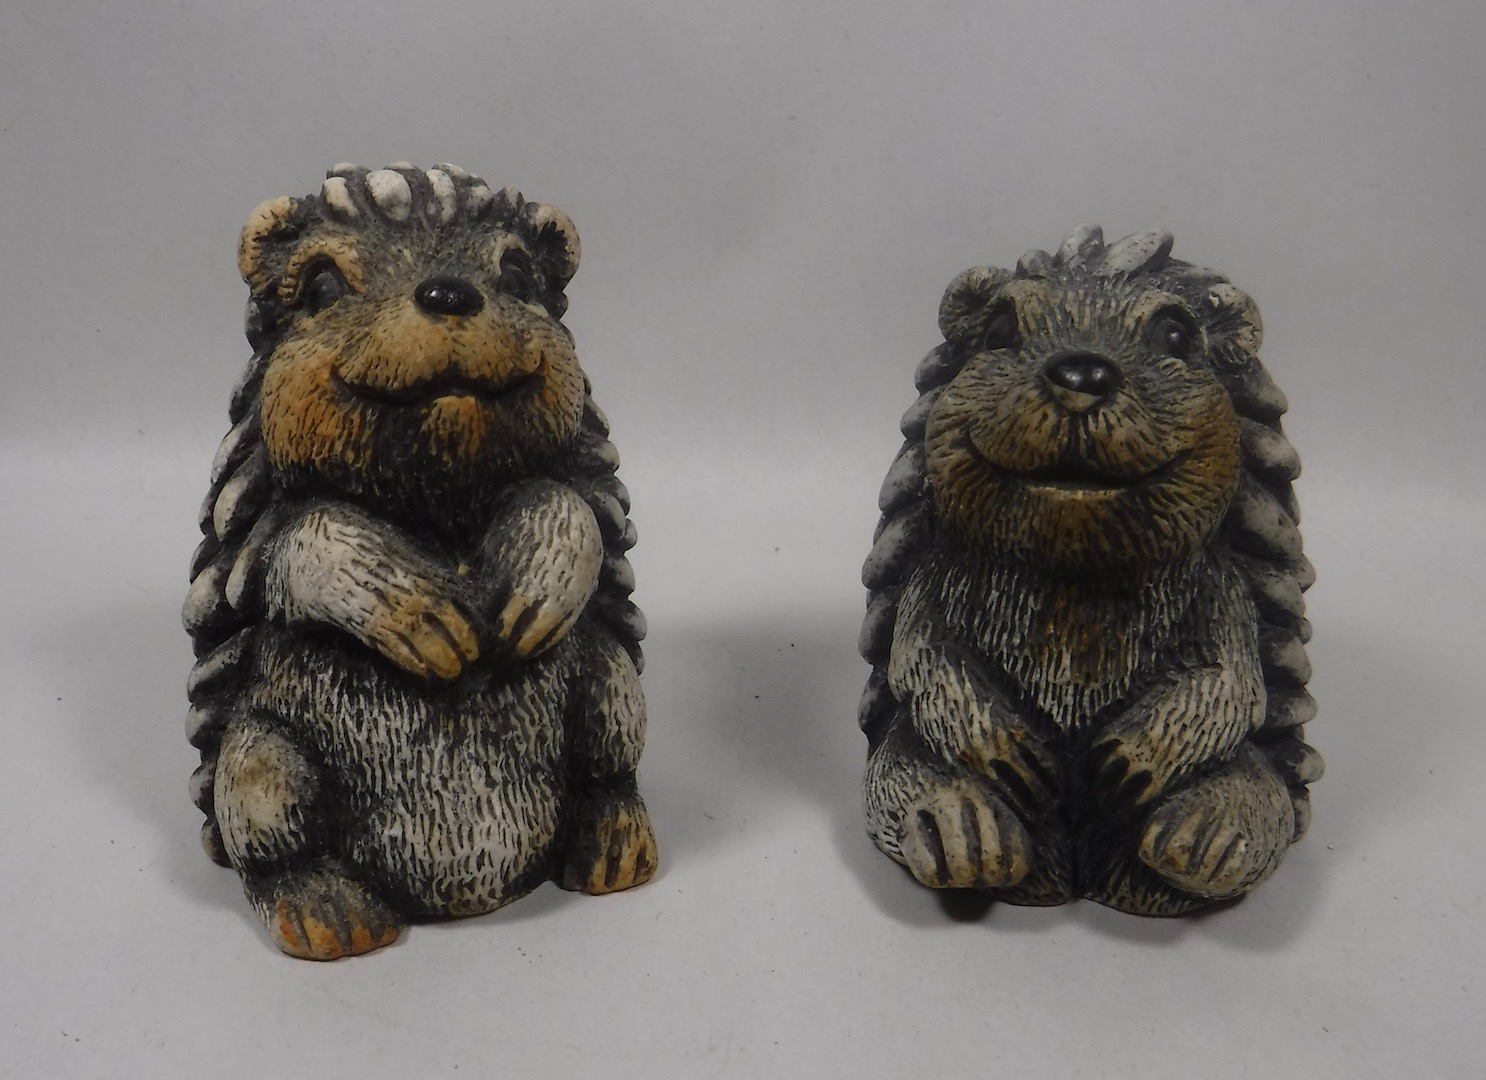 Pottery or Composite? Hedgehogs | Antiques Board